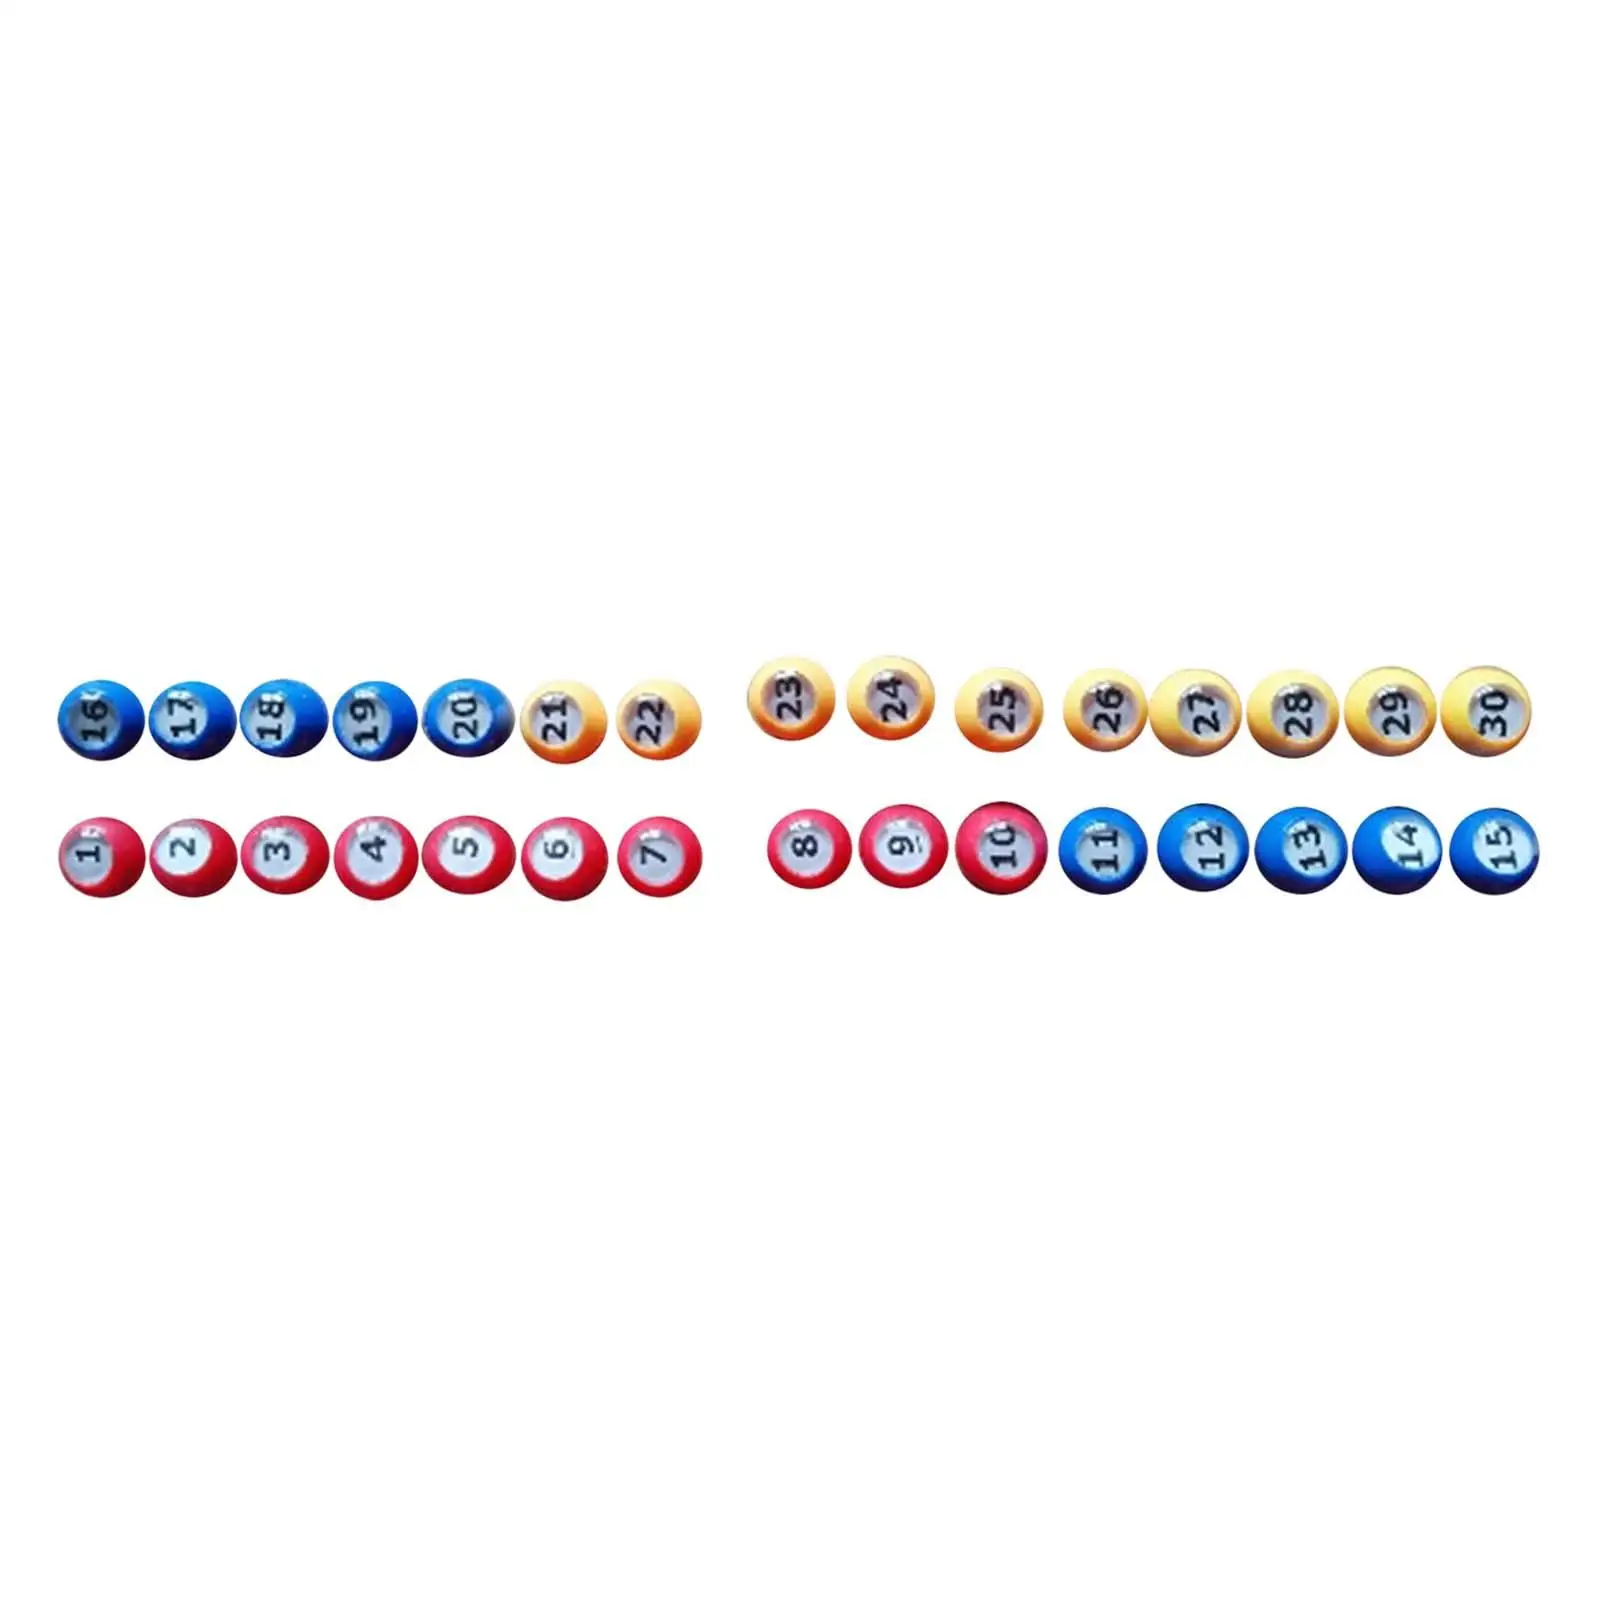 30x Bingo Ball Fitments Replacement Parts Durable Universal 1-30 Numbers for